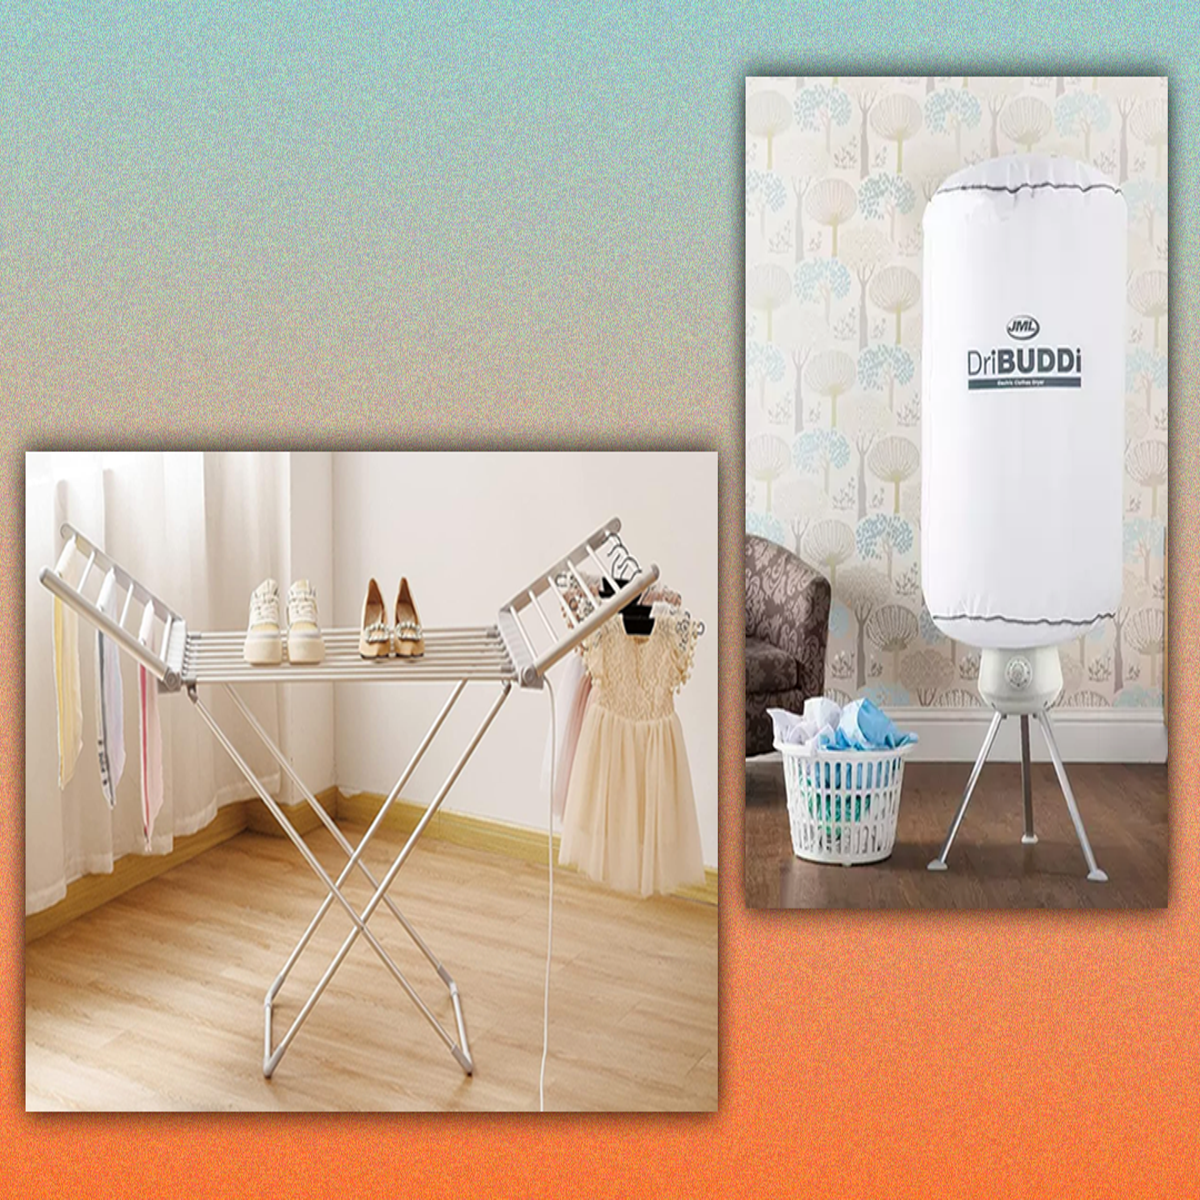 Homefront Electric Heated Clothes Horse Airer Dryer Rack with FREE